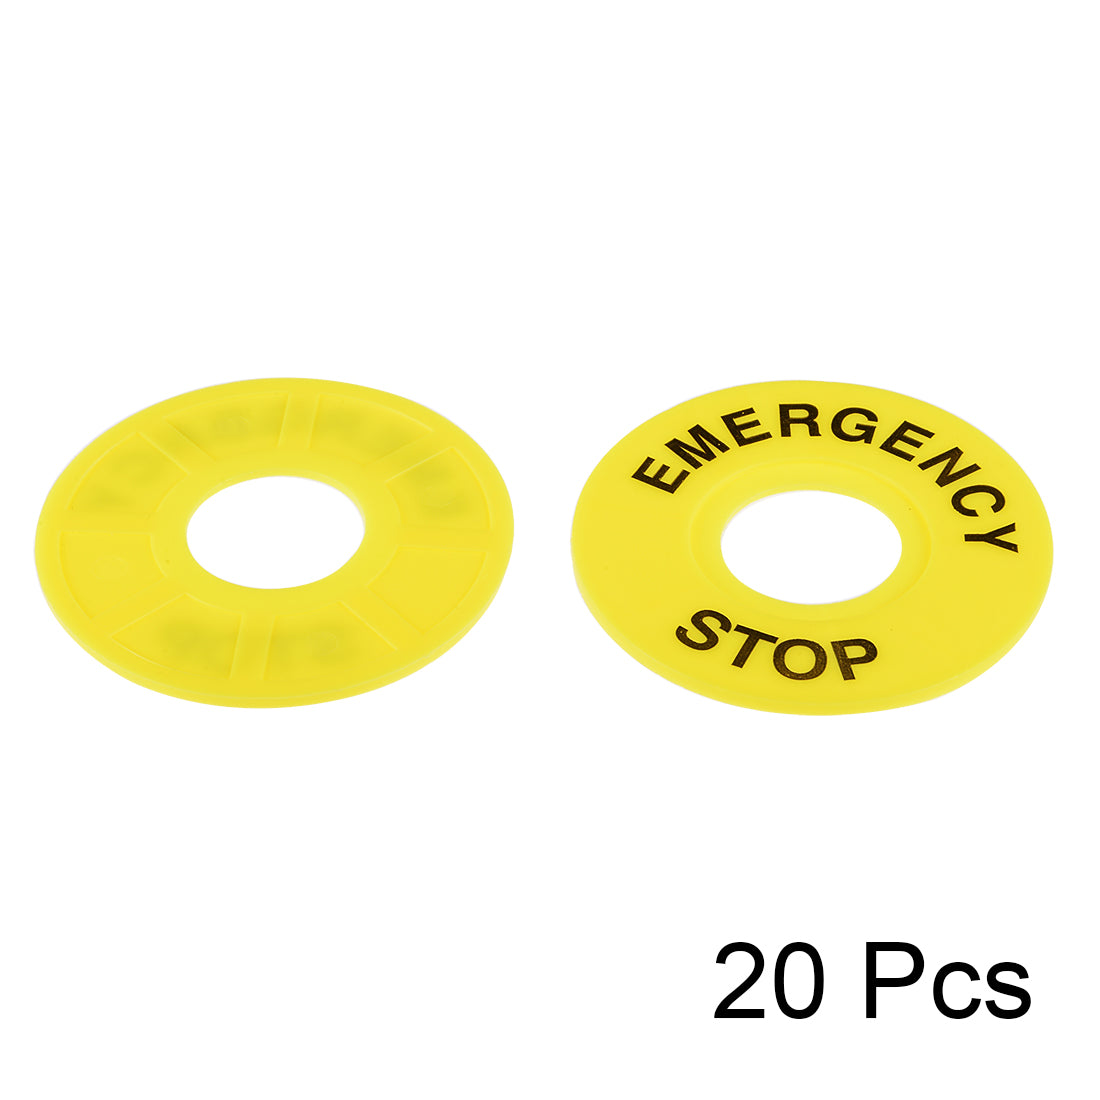 uxcell Uxcell 20 Pcs 22mm Inner Diameter Emergency Stop Sign For Push Button Switch Replacement